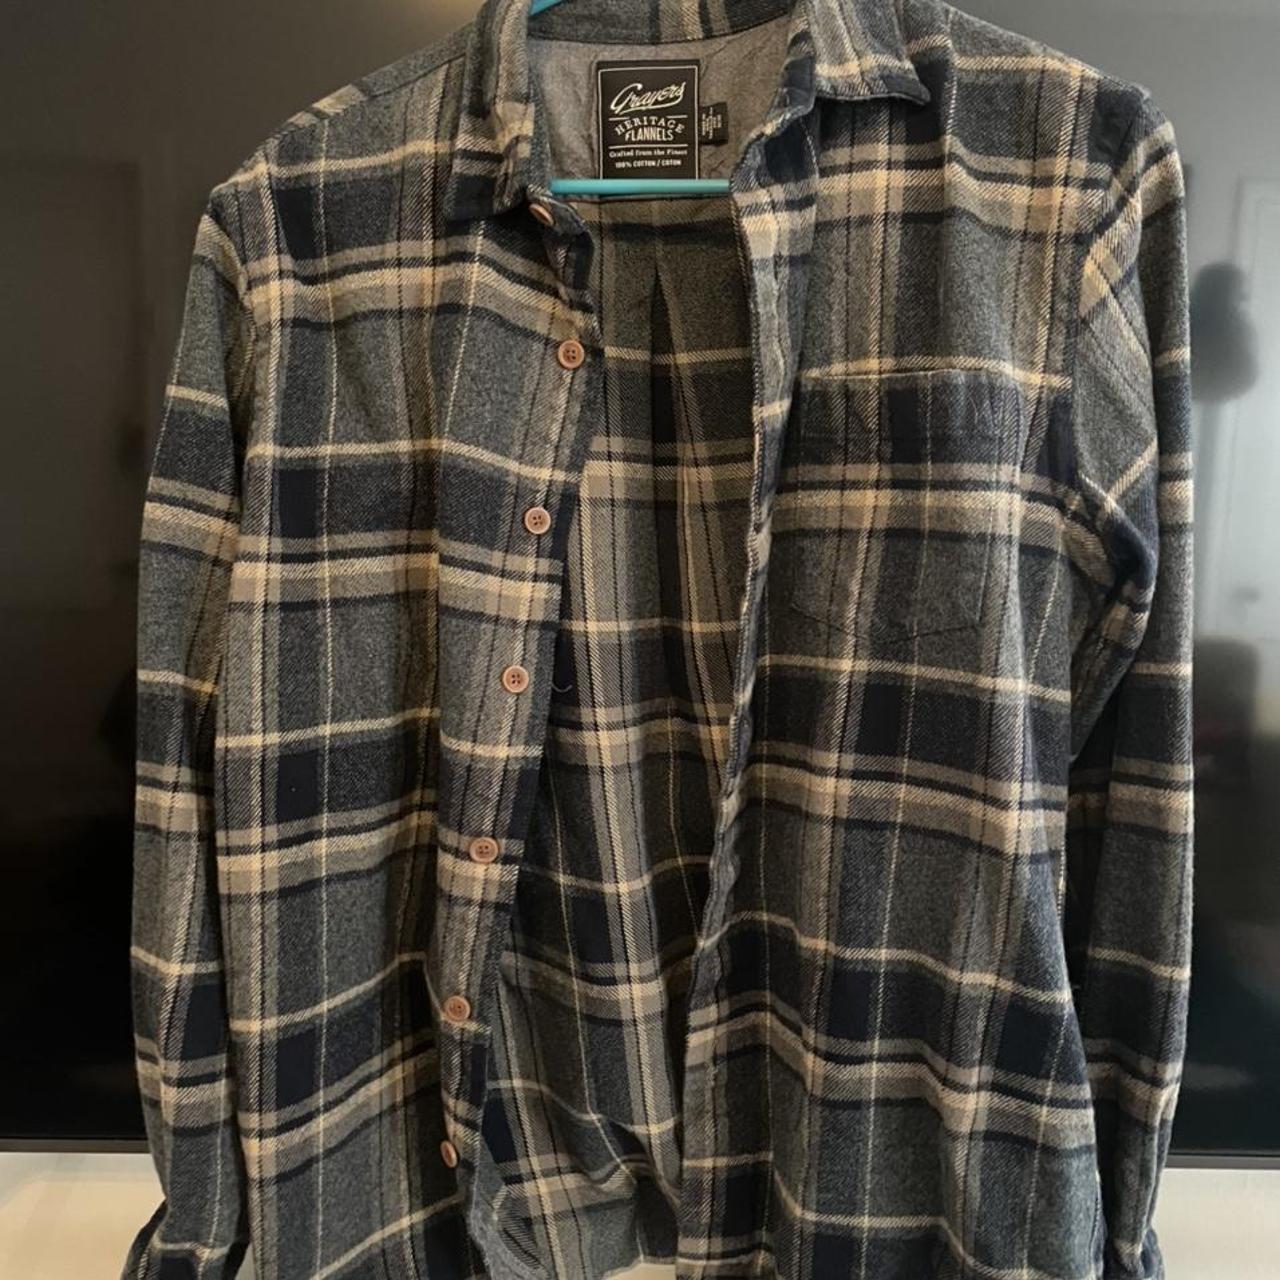 Product Image 1 - Grayers flannel. Brand new, never